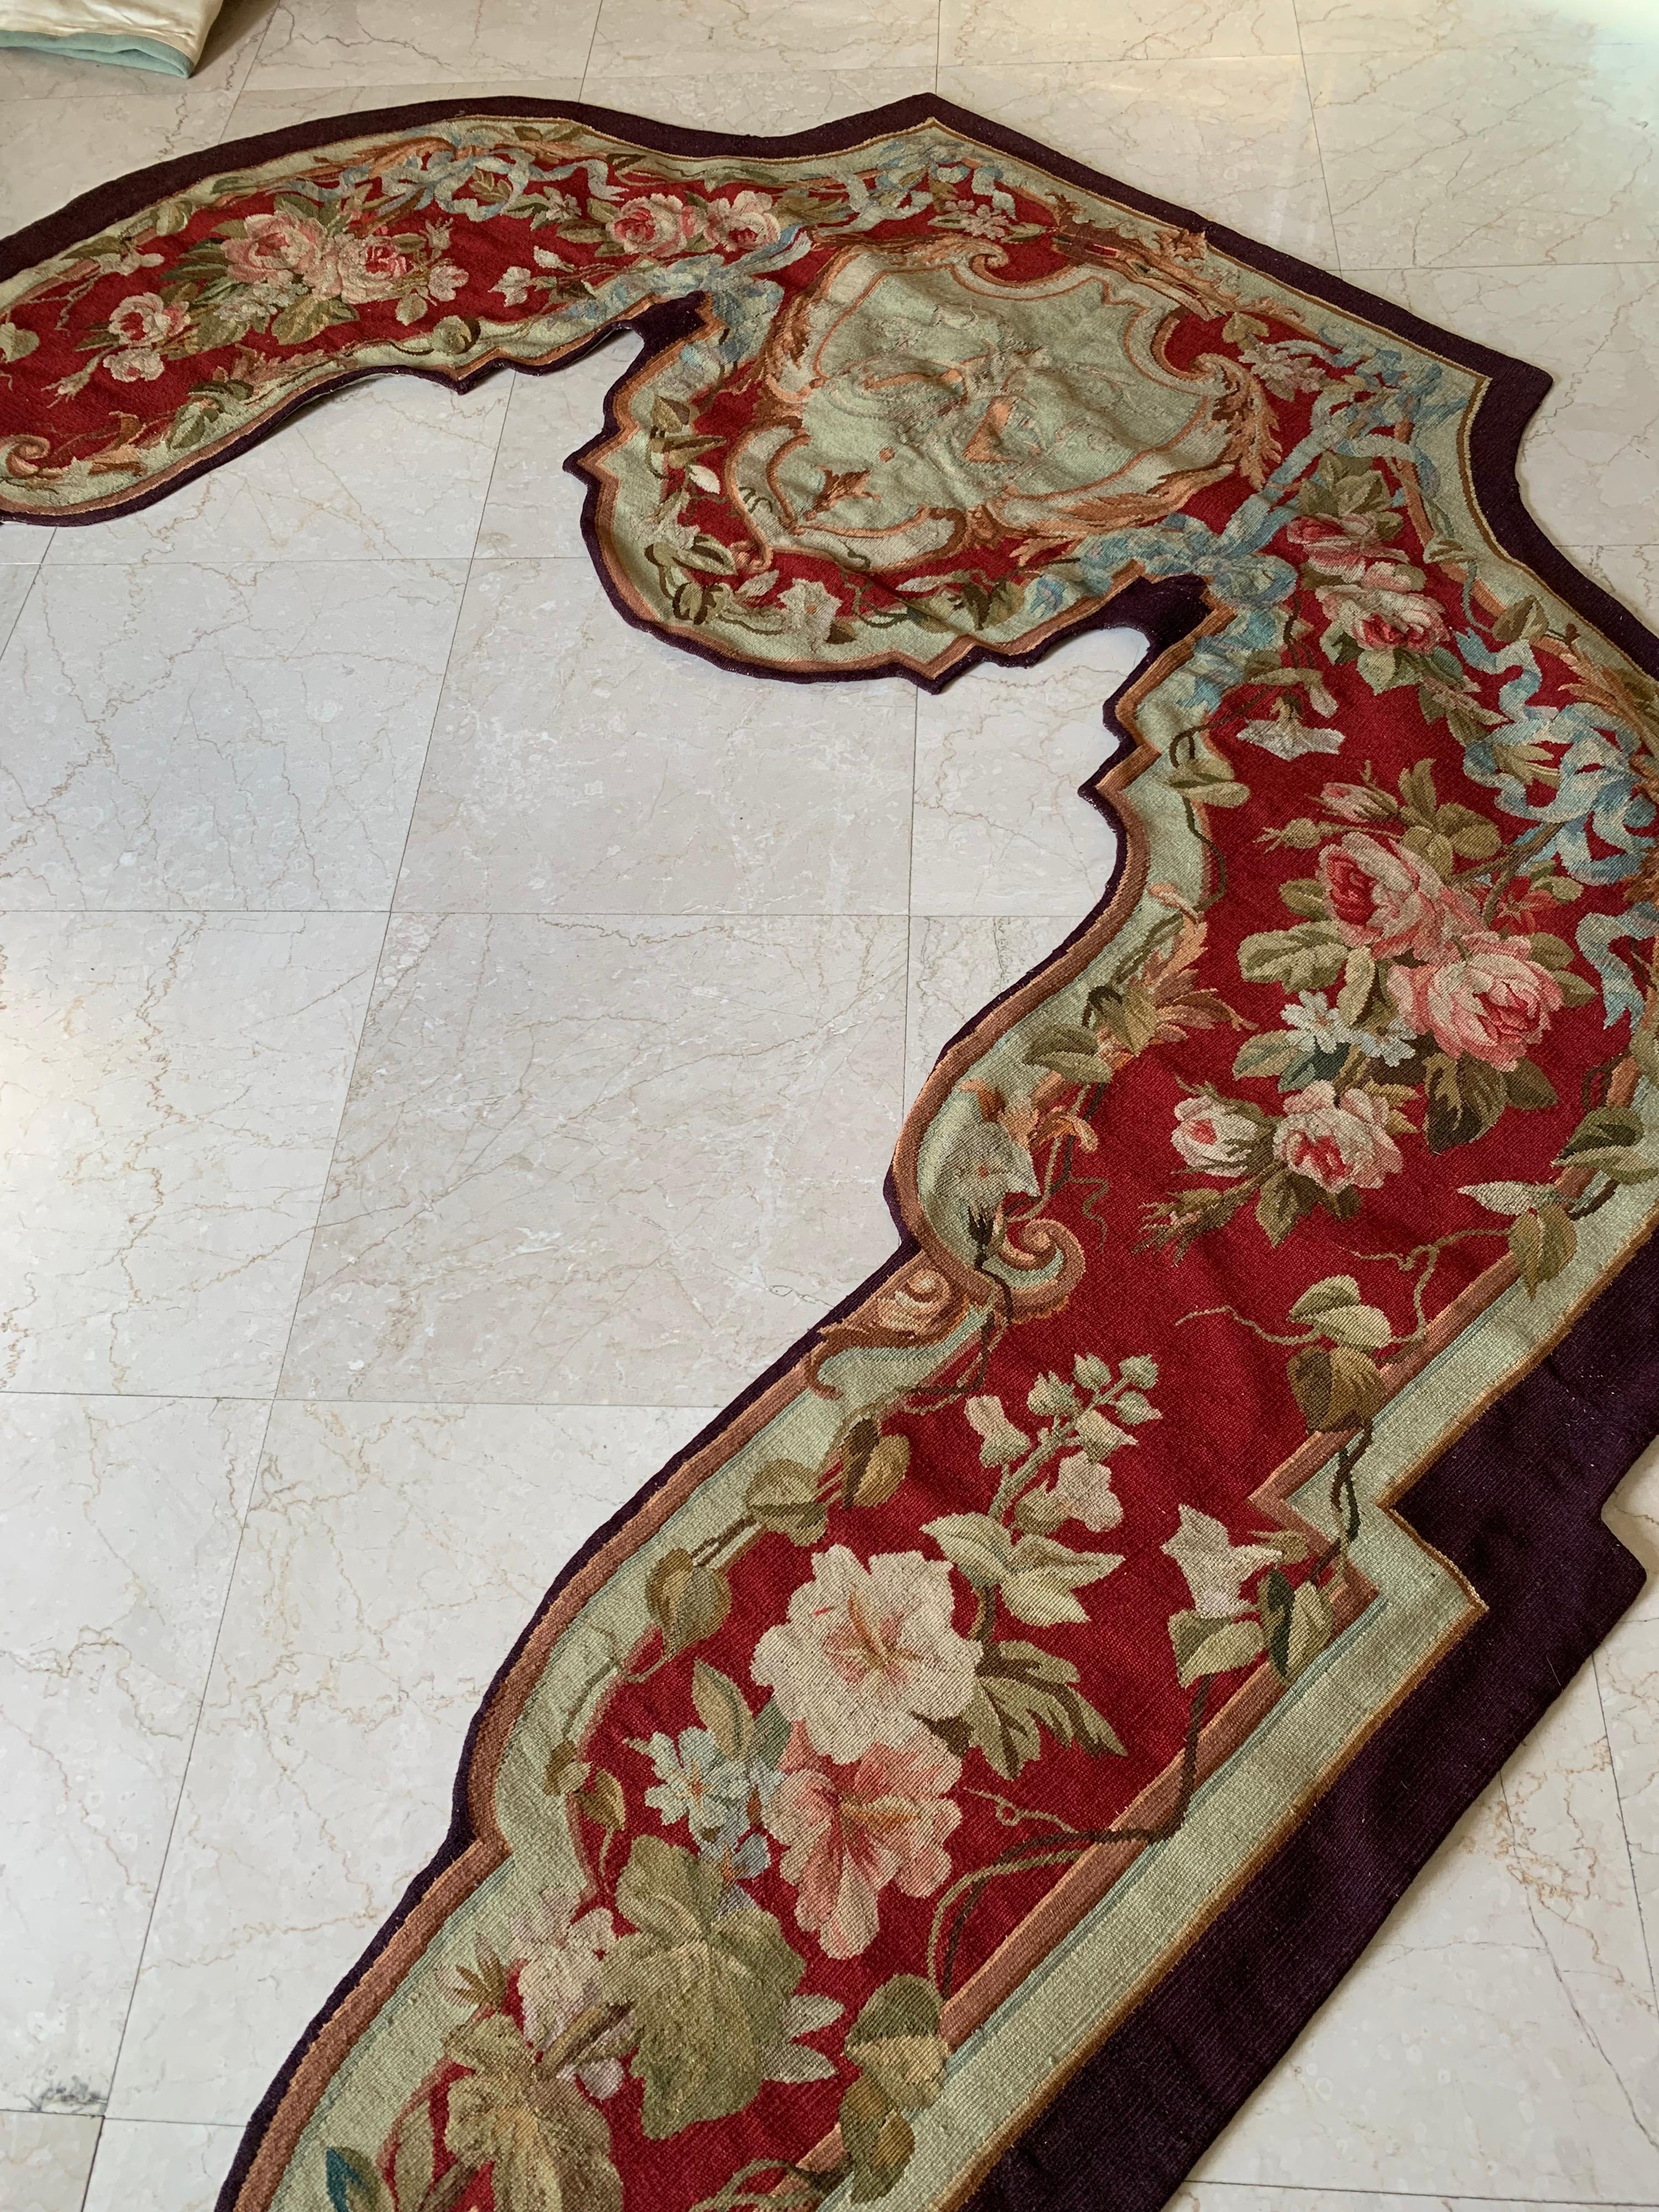 Called portière, these antique wall hanging tapestries were handwoven in Aubusson, France in the 19th Century. They both feature floral and foliage decor in a deep red and beige palette. Portière tapestries were traditionally used in French chateaux